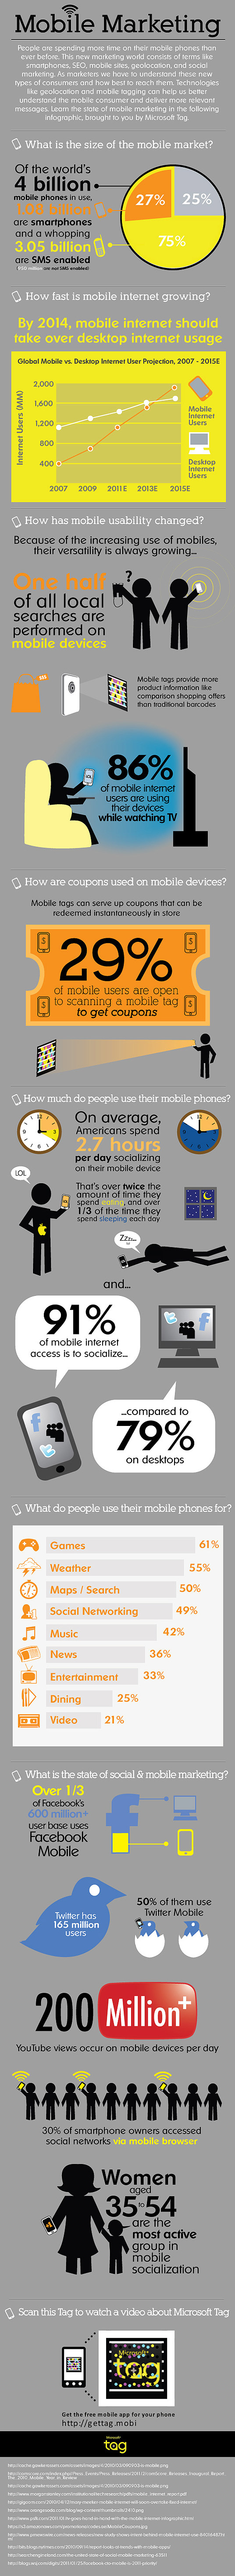 2011-mobile-statistics-stats-facts-infographic-large